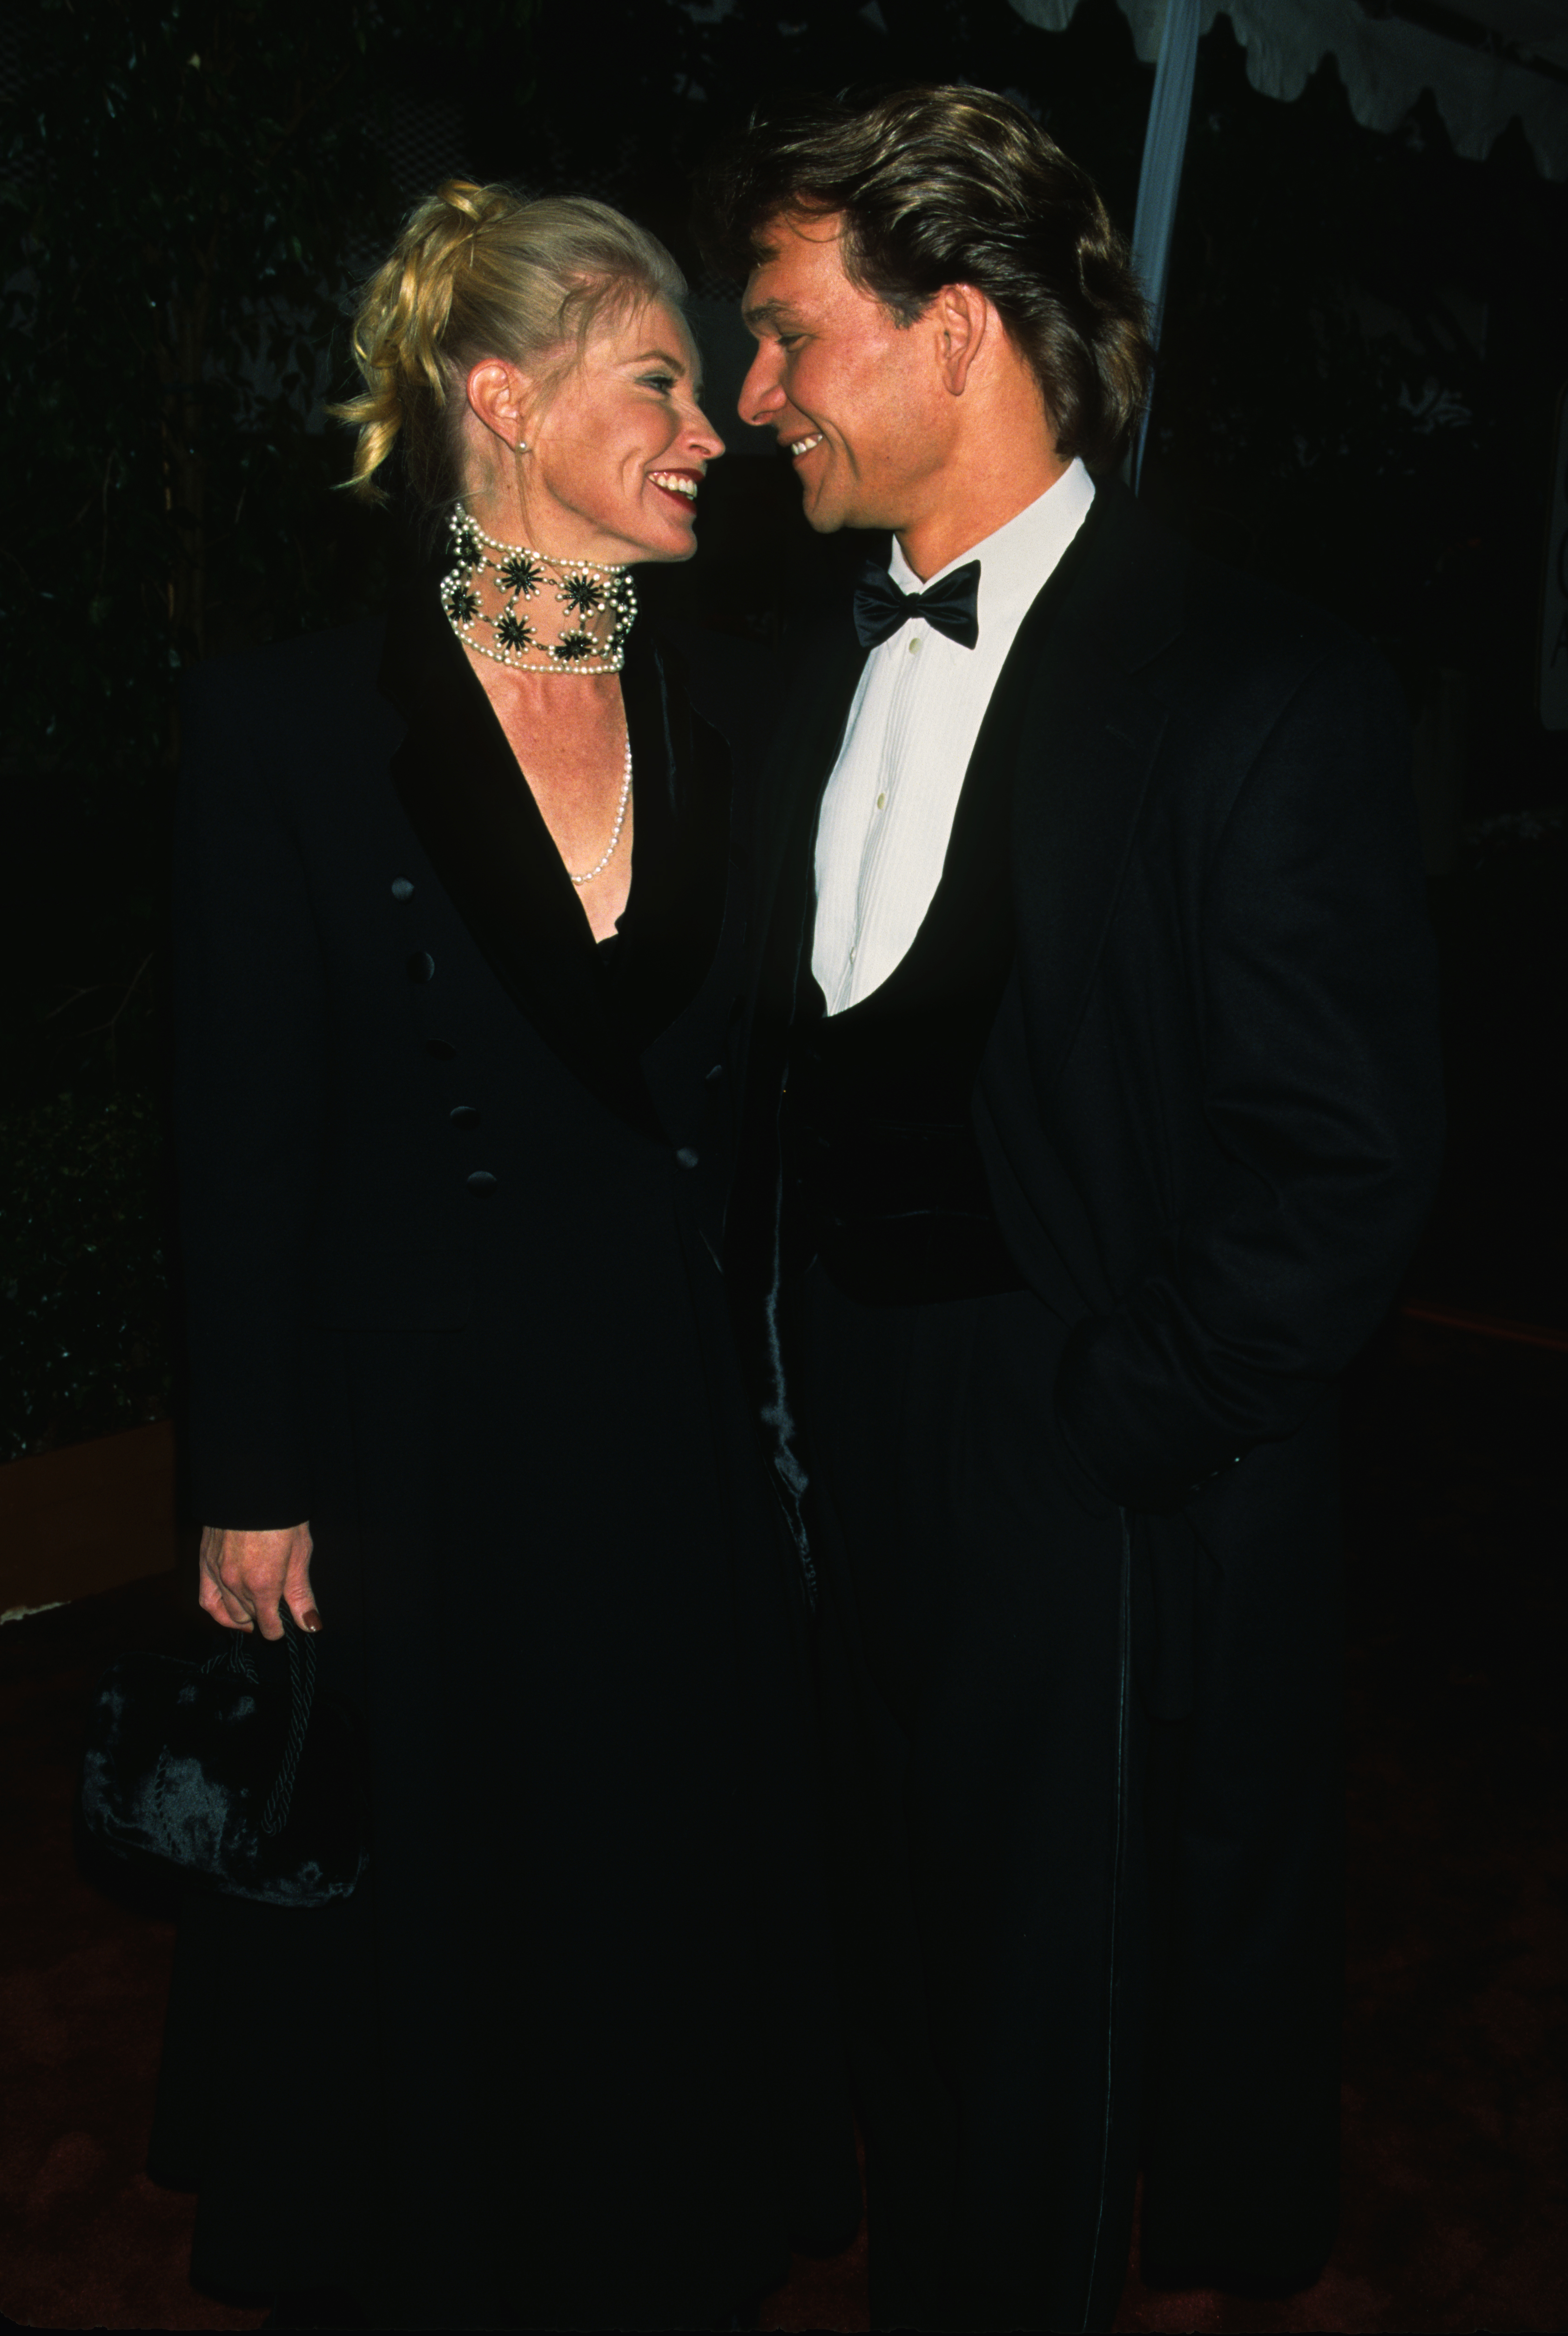 Patrick Swayze and Lisa Niemi at the 61st Annual Academy Awards on March 29, 1989 in Los Angeles California | Source: Getty Images